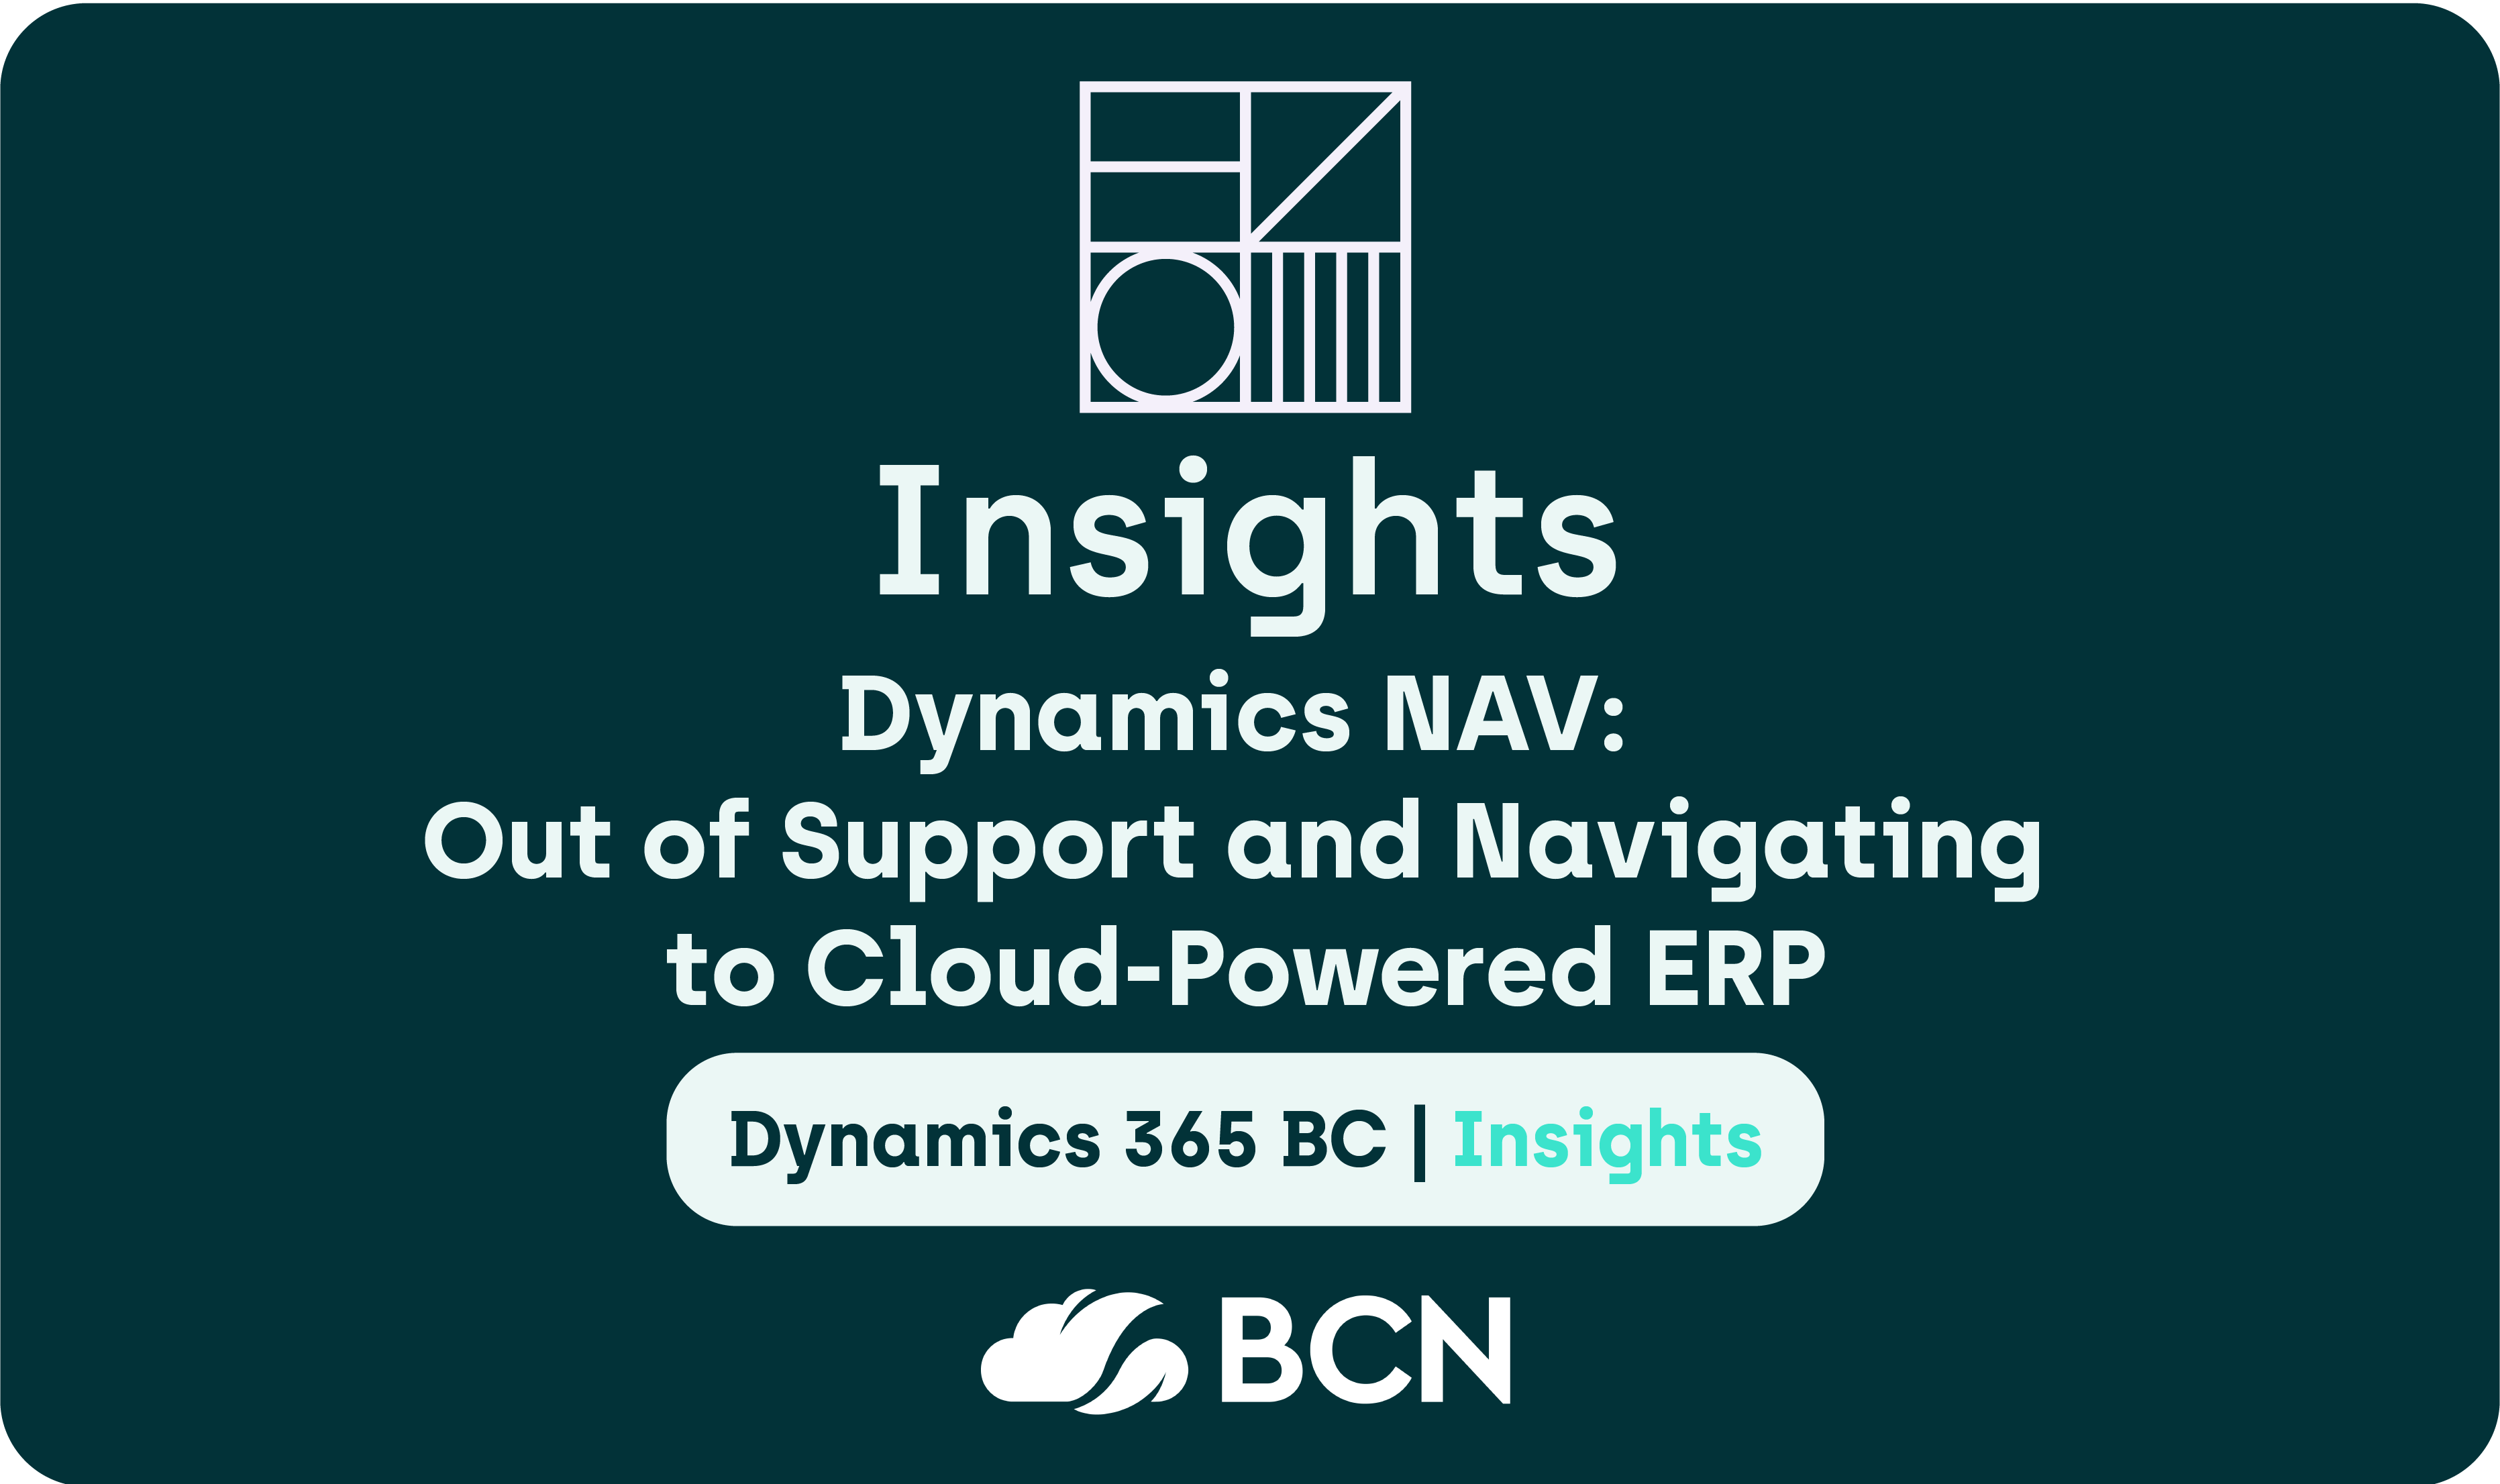 Dynamics NAV End of Support: Dates, impact and moving to Cloud ERP